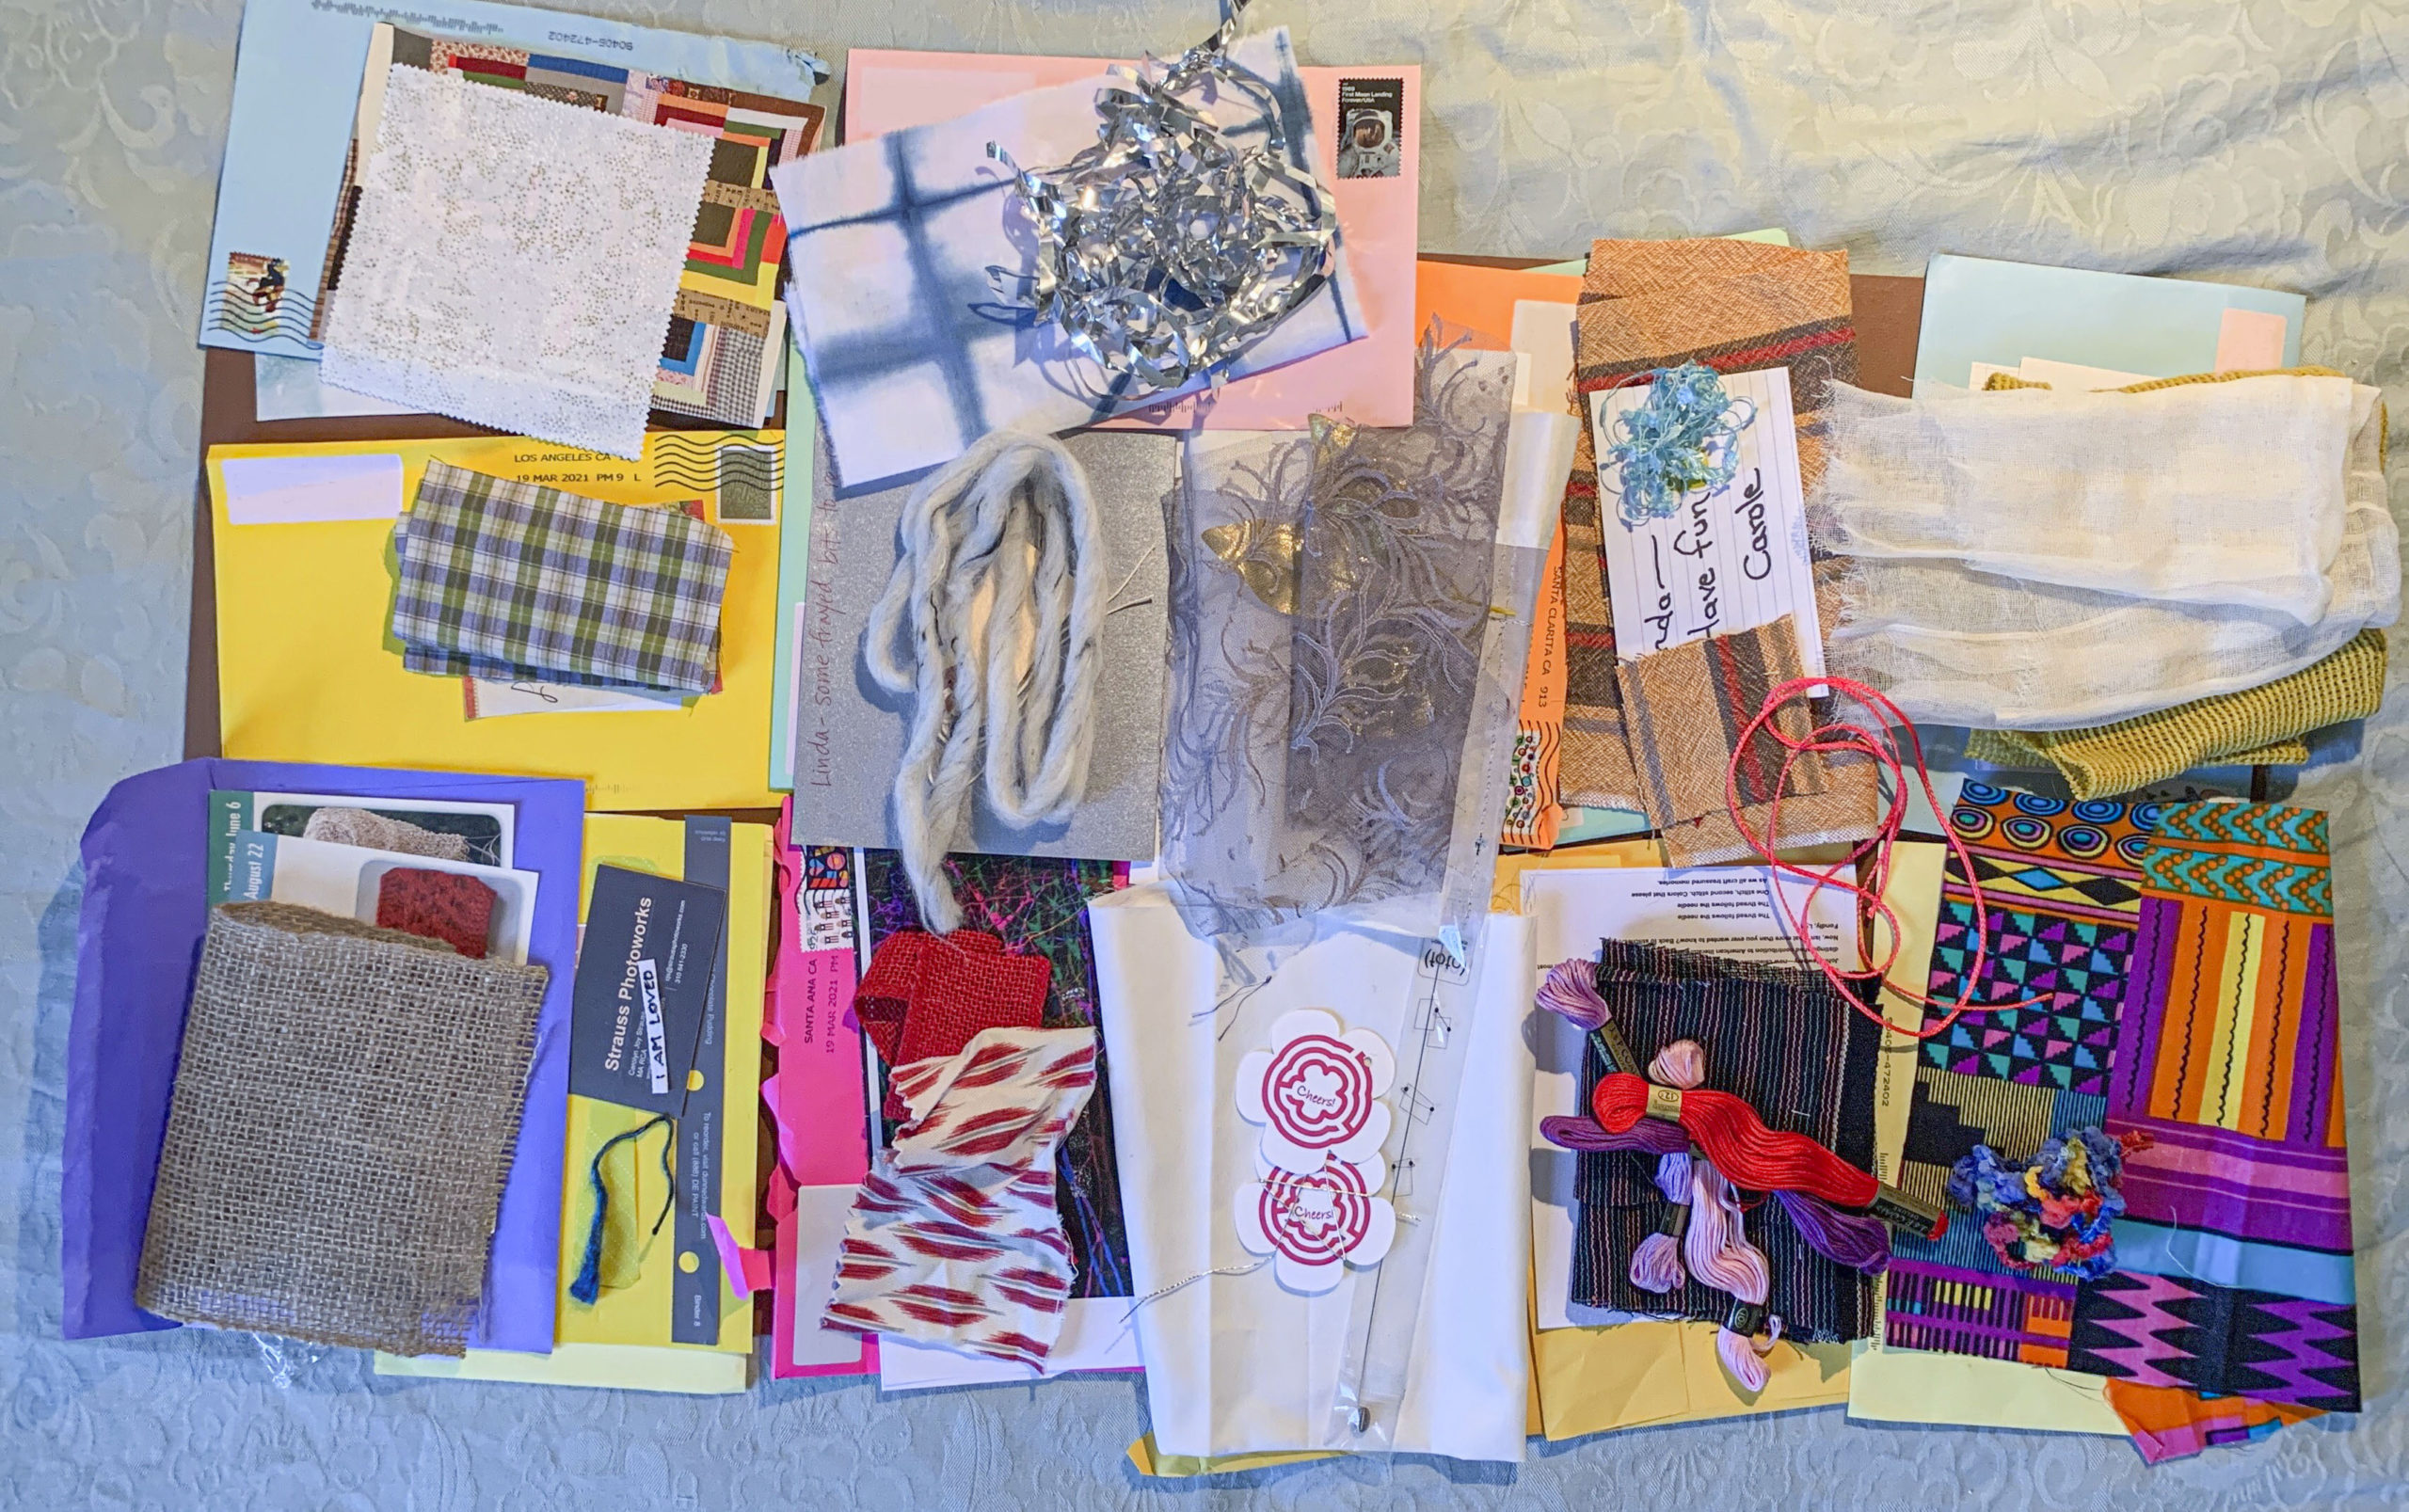 Material mail exchange. Participants shared some of their own fibers and materials with each other.